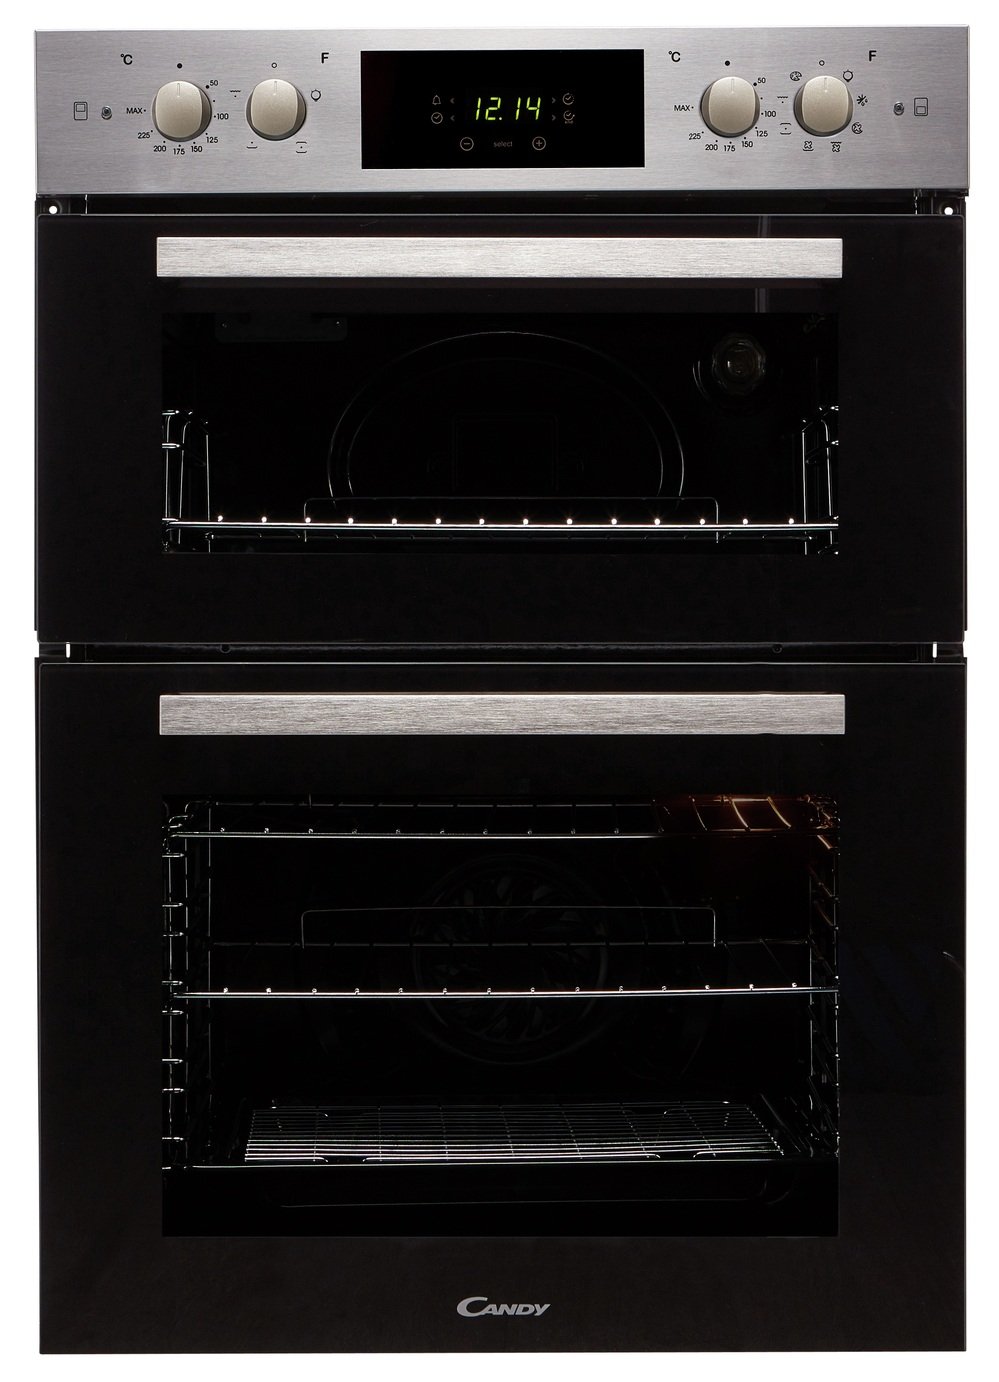 Candy FC9D815X Double Multifunction Oven - Stainless Steel